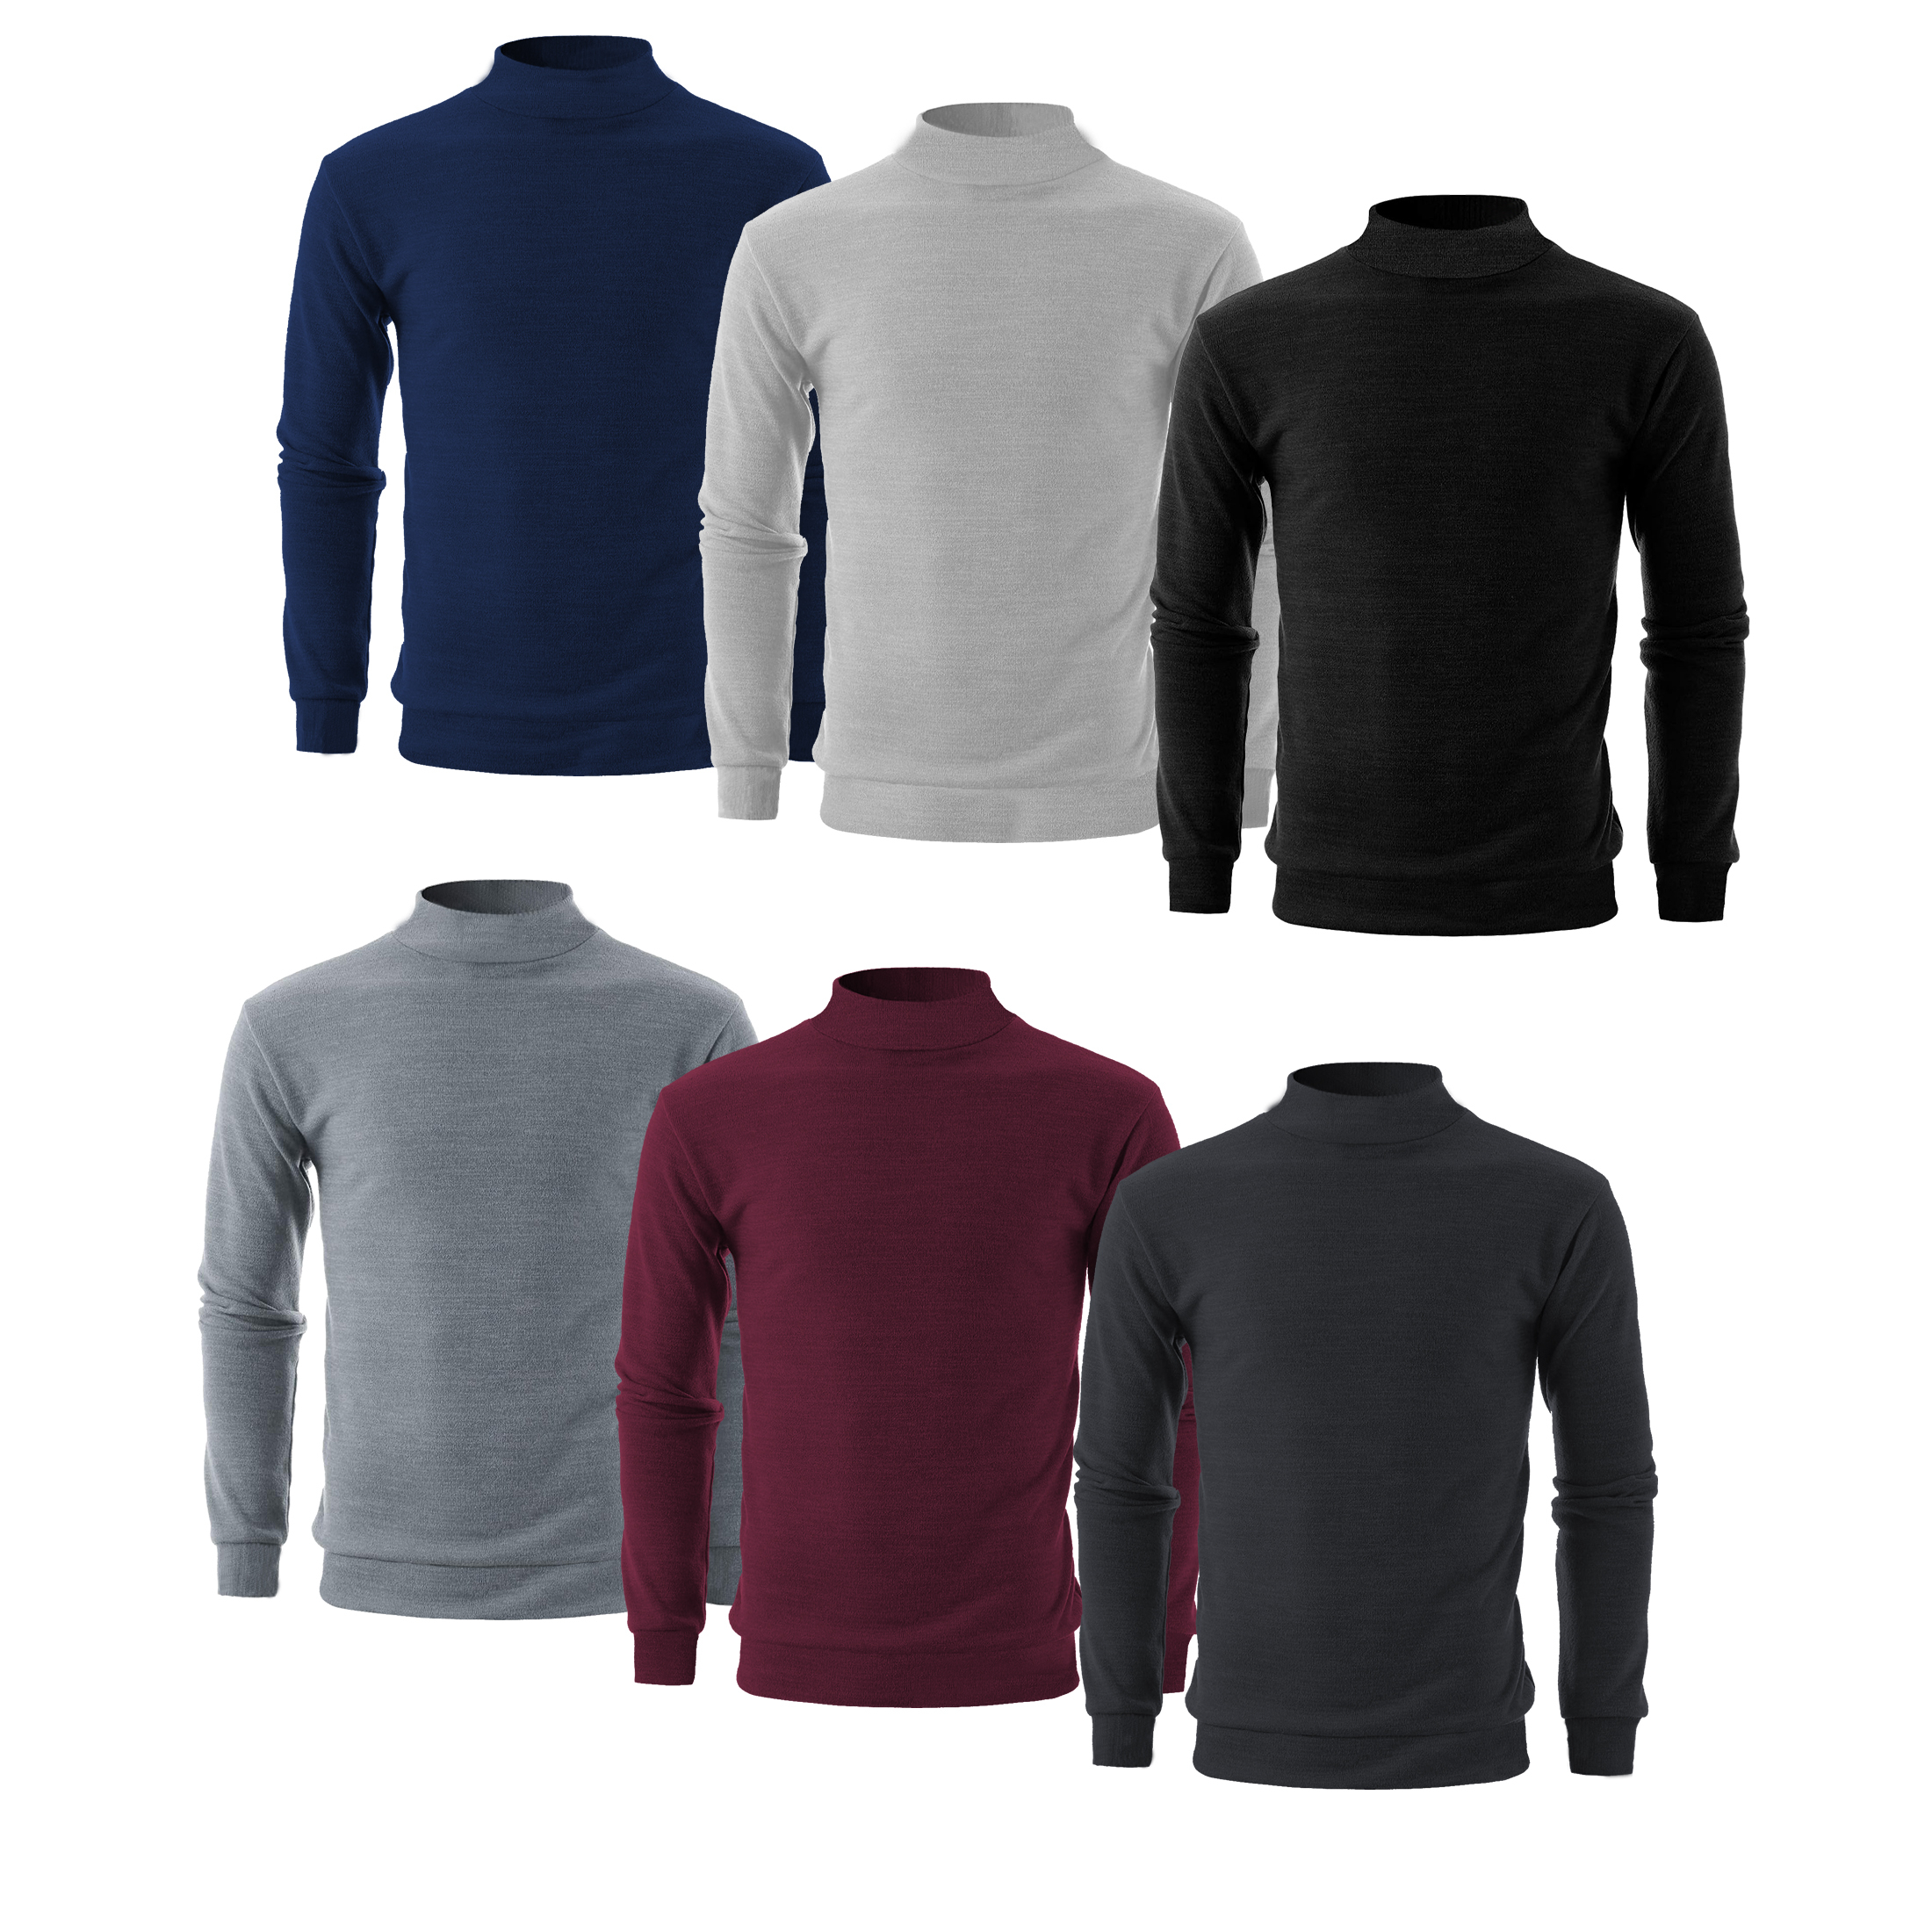 2 Pack:Men's Slim Fit Long Sleeve Casual Mock Neck Pullover Sweater - 2X-Large